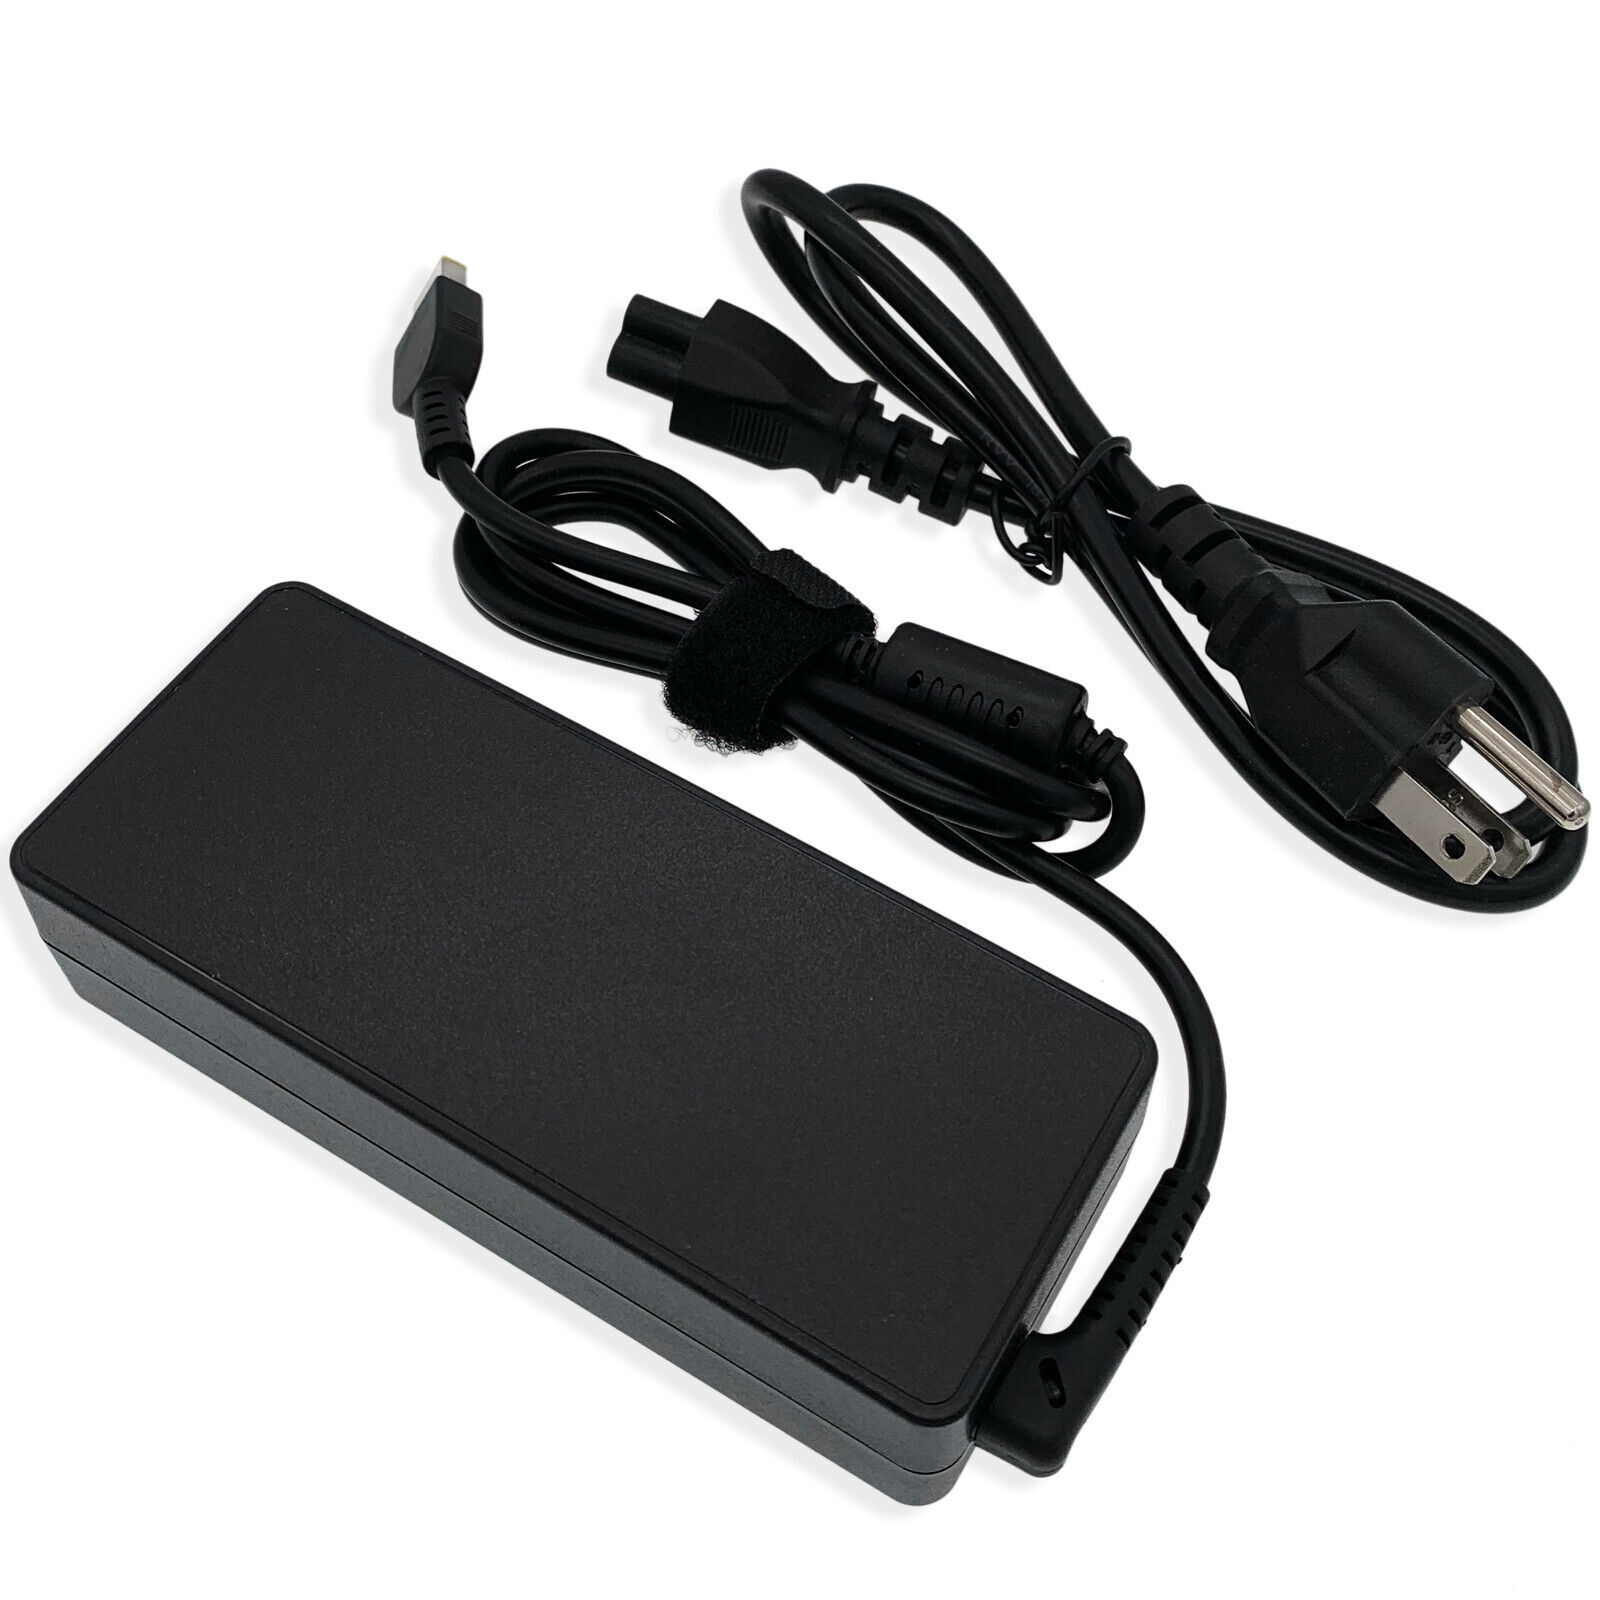 AC Adapter Charger for Lenovo 65w Slim Tip Ac Adapter 0A36258